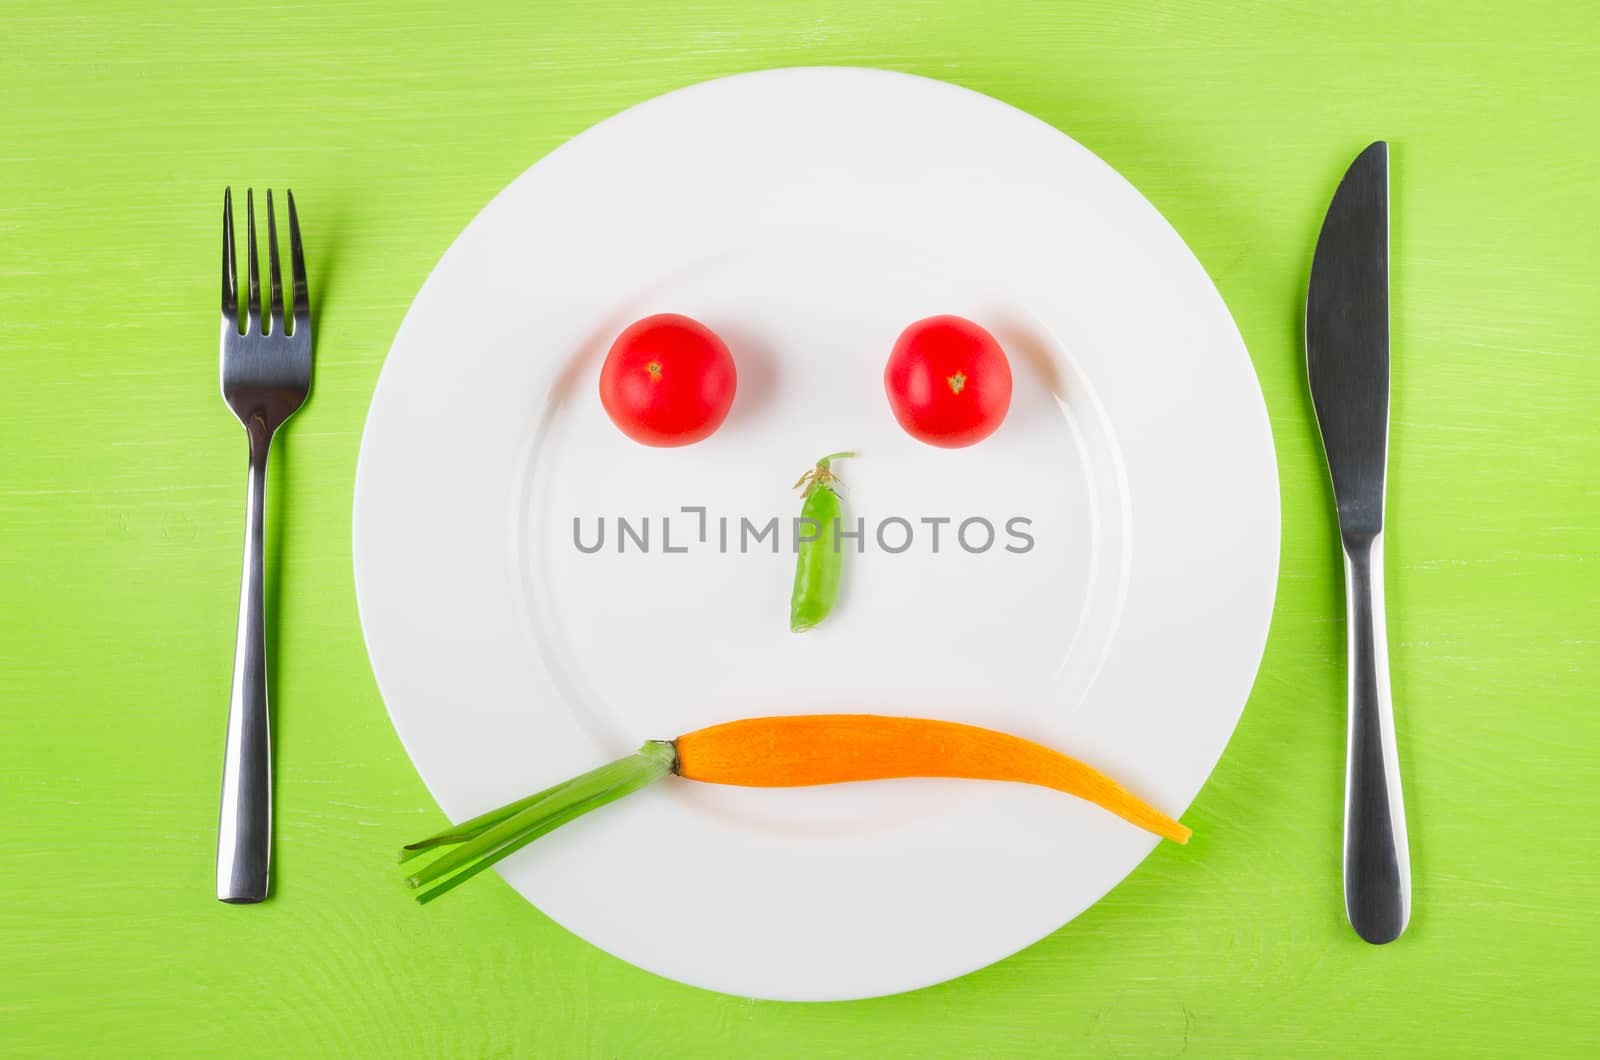 Sad face of vegetables, the concept of dietary restrictions, healthy lifestyle, diet,  weight loss, anti-obesity, healthy diet. Two tomatoes, peas in a pod and carrots on a plate, knife, fork